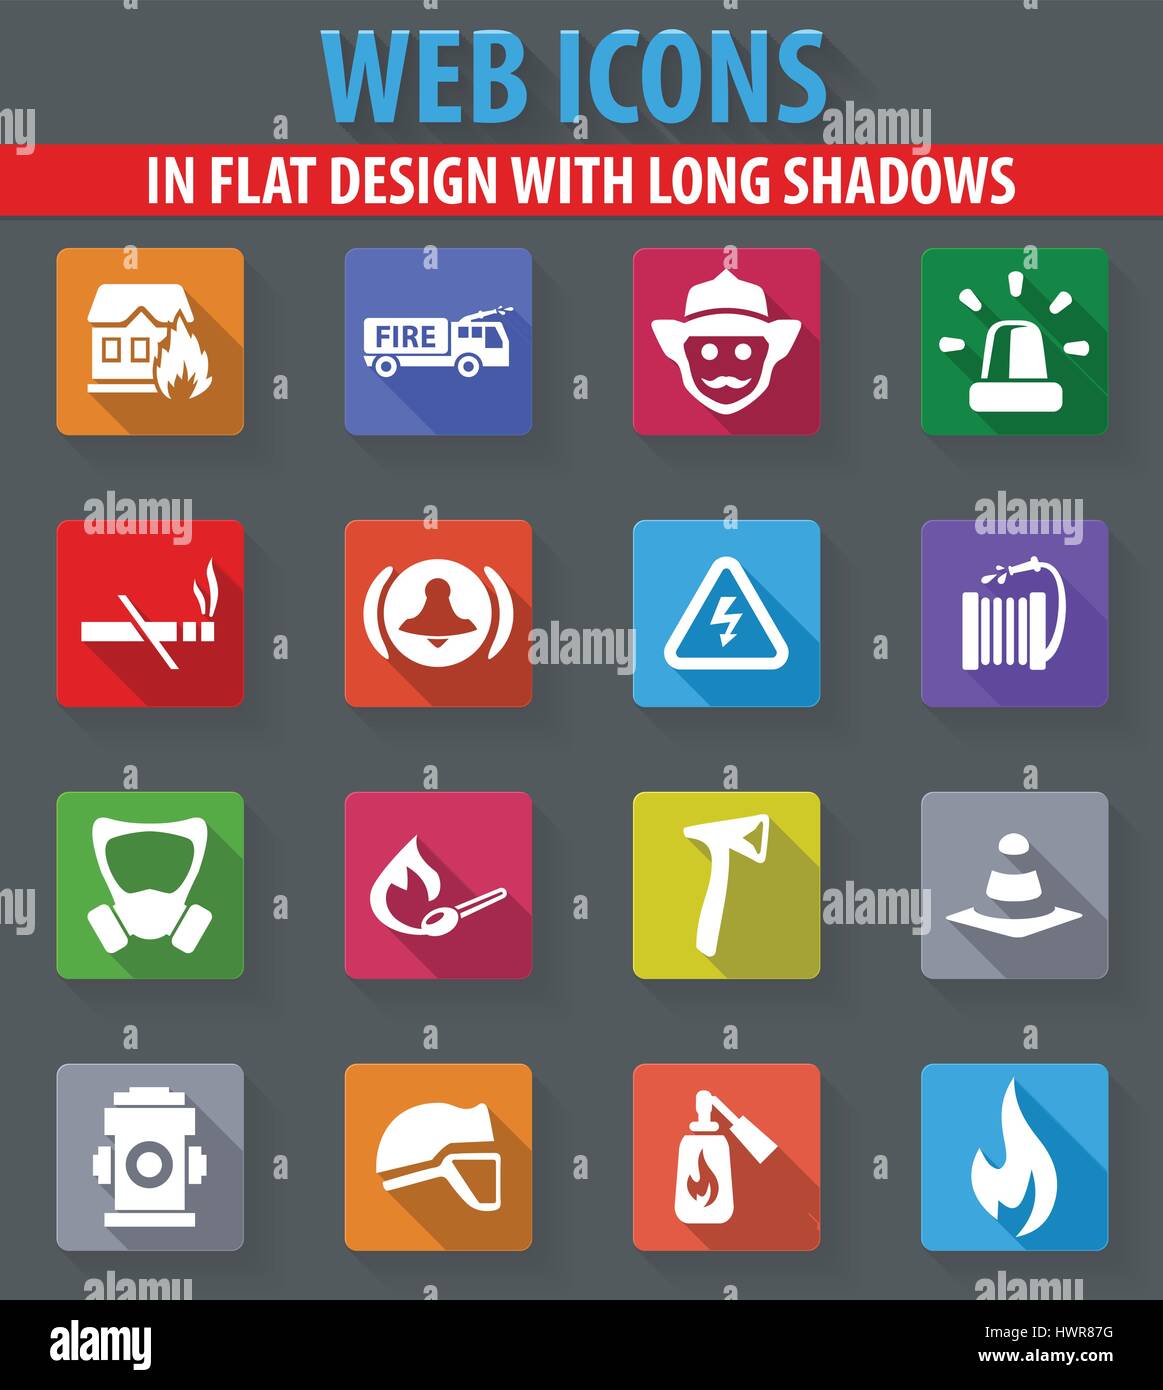 Fire brigade web icons in flat design with long shadows Stock Vector